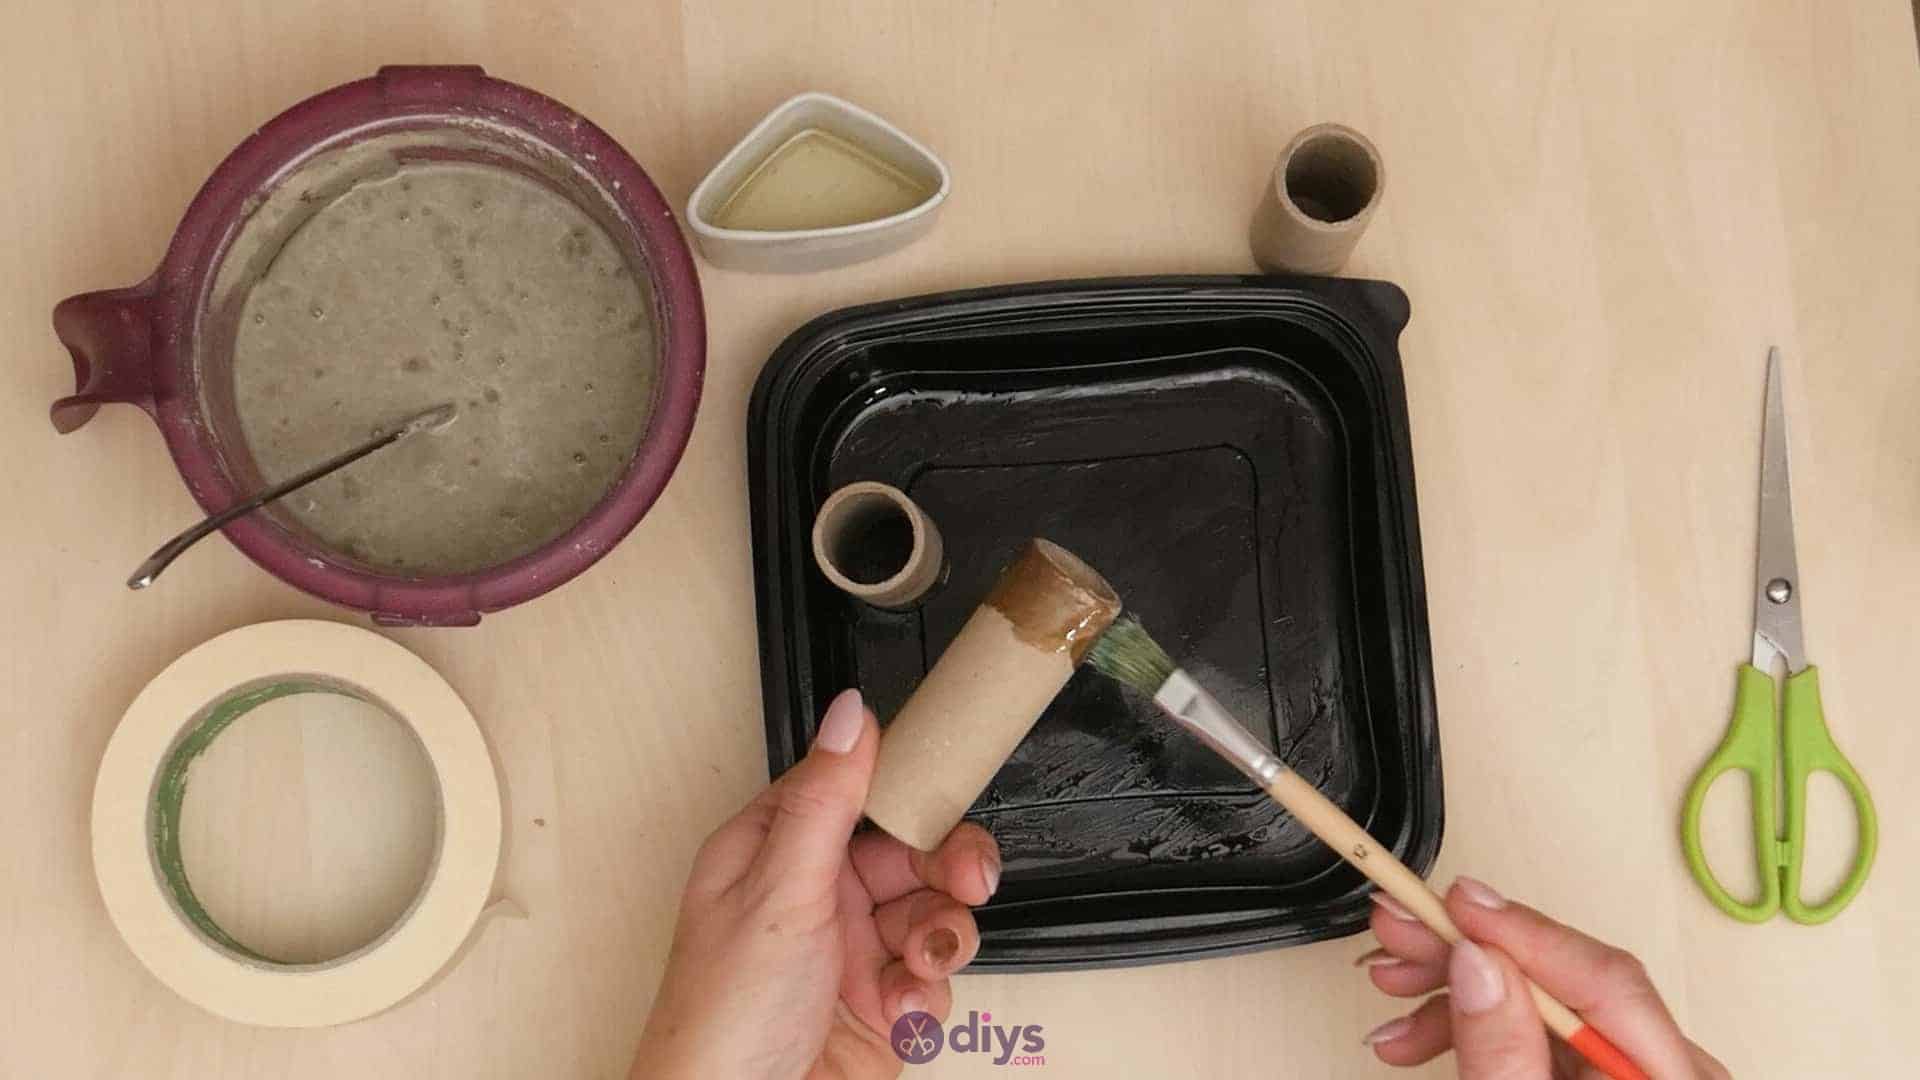 Diy concrete candle holder plate step 3